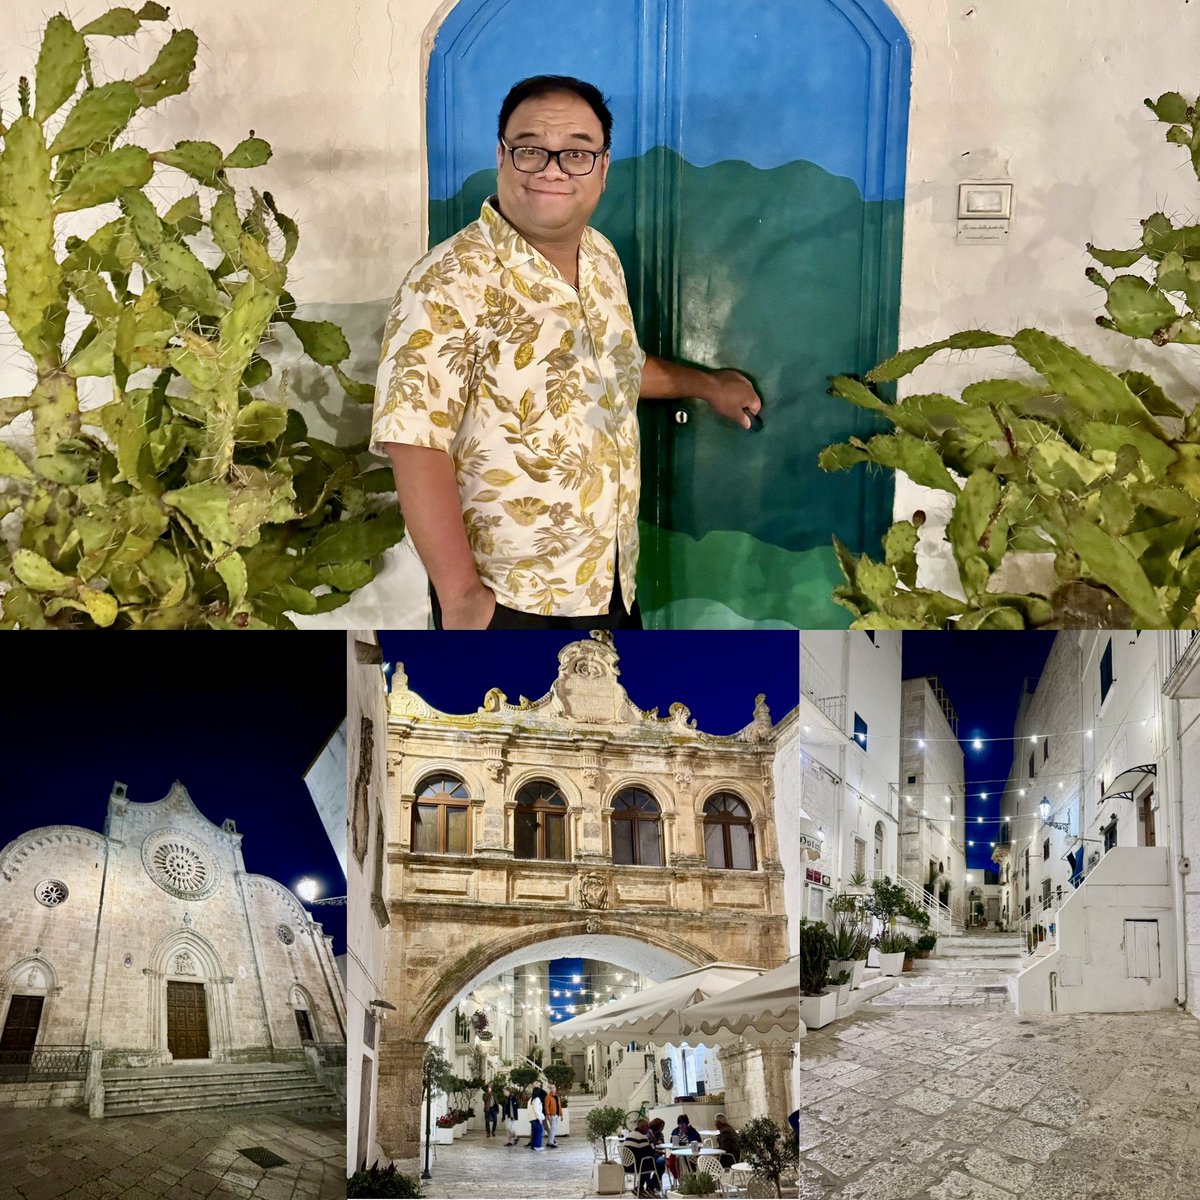 #Italy2024 Day 6:

- Monopoli 🚗 Polignano a Mare
- Walked down to get some beach vibes
- Observed the beach and the Adriatic Sea from above 
- Polignano a Mare 🚗 Ostuni
- Enjoyed a view of Ostuni from a lookout point
- Walked from the bottom to the top to find the “blue door”